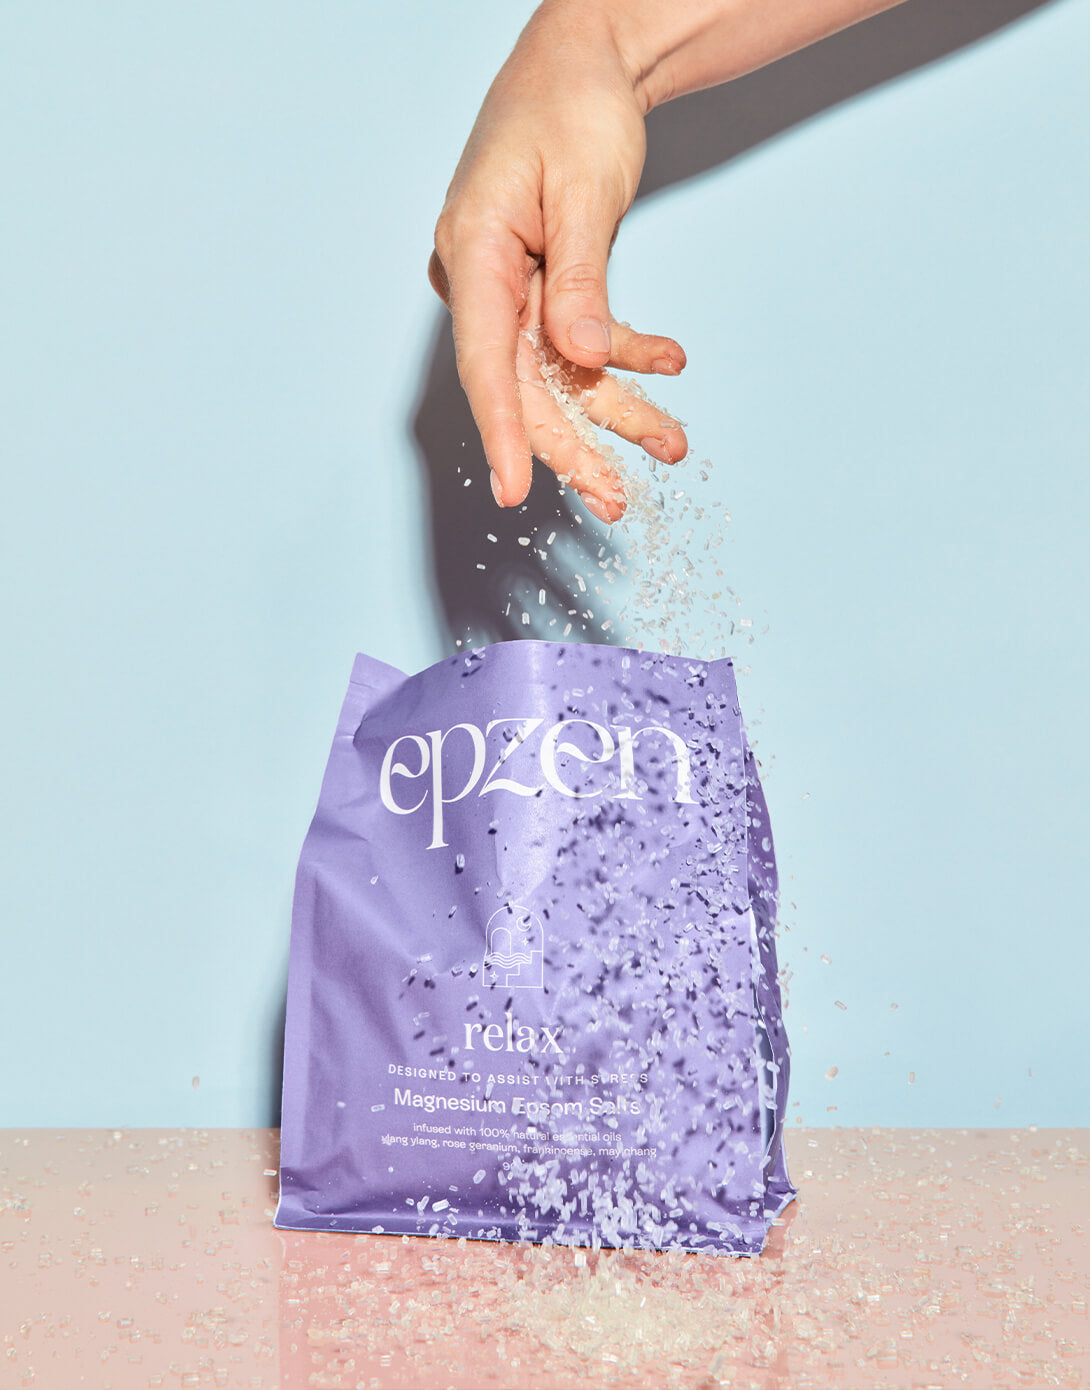 EpZen Magnesium Epsom Salts 900g, Relax {Assist With Stress}